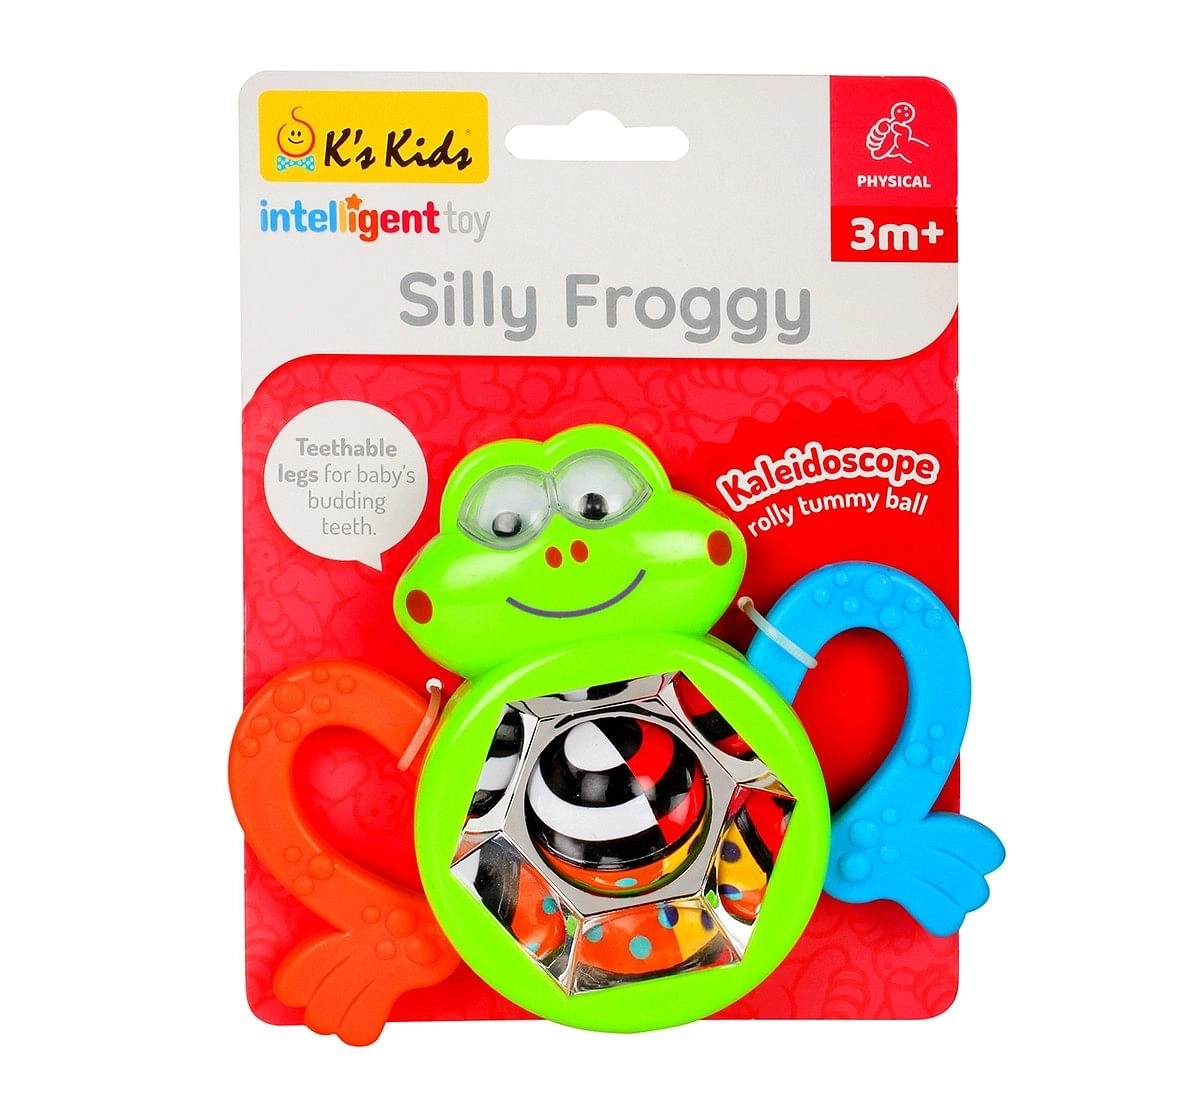 K'S Kids Silly Froggy New Born for Kids age 3M+ 